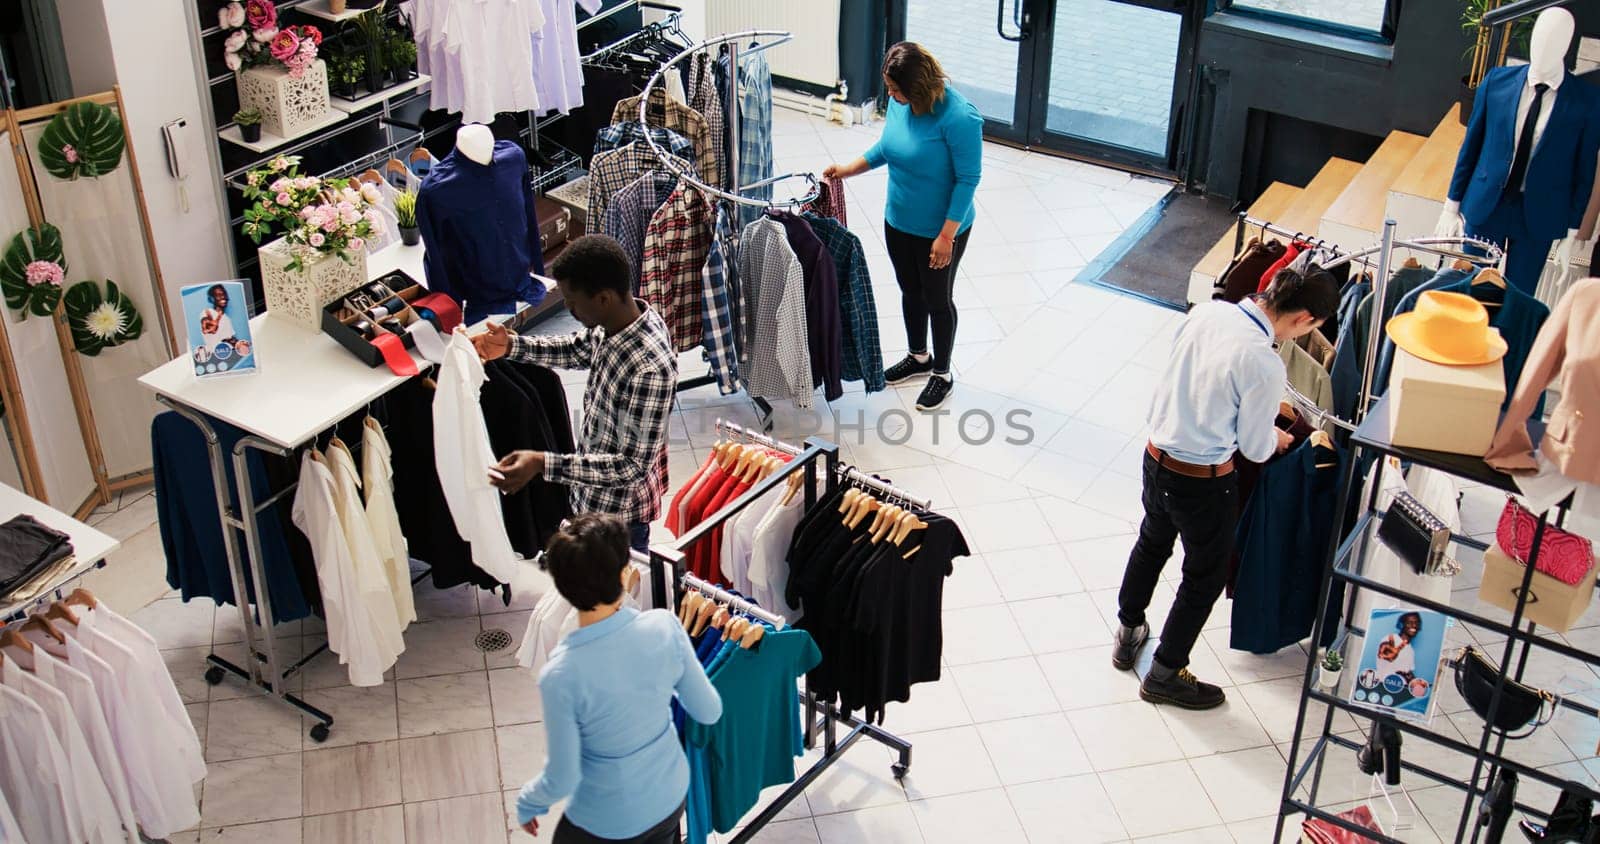 Top view of diverse customers checking stylish clothes, shopping for fashionable merchandise and accessories in modern boutique. Clients analyzing hangers with new fashion collection